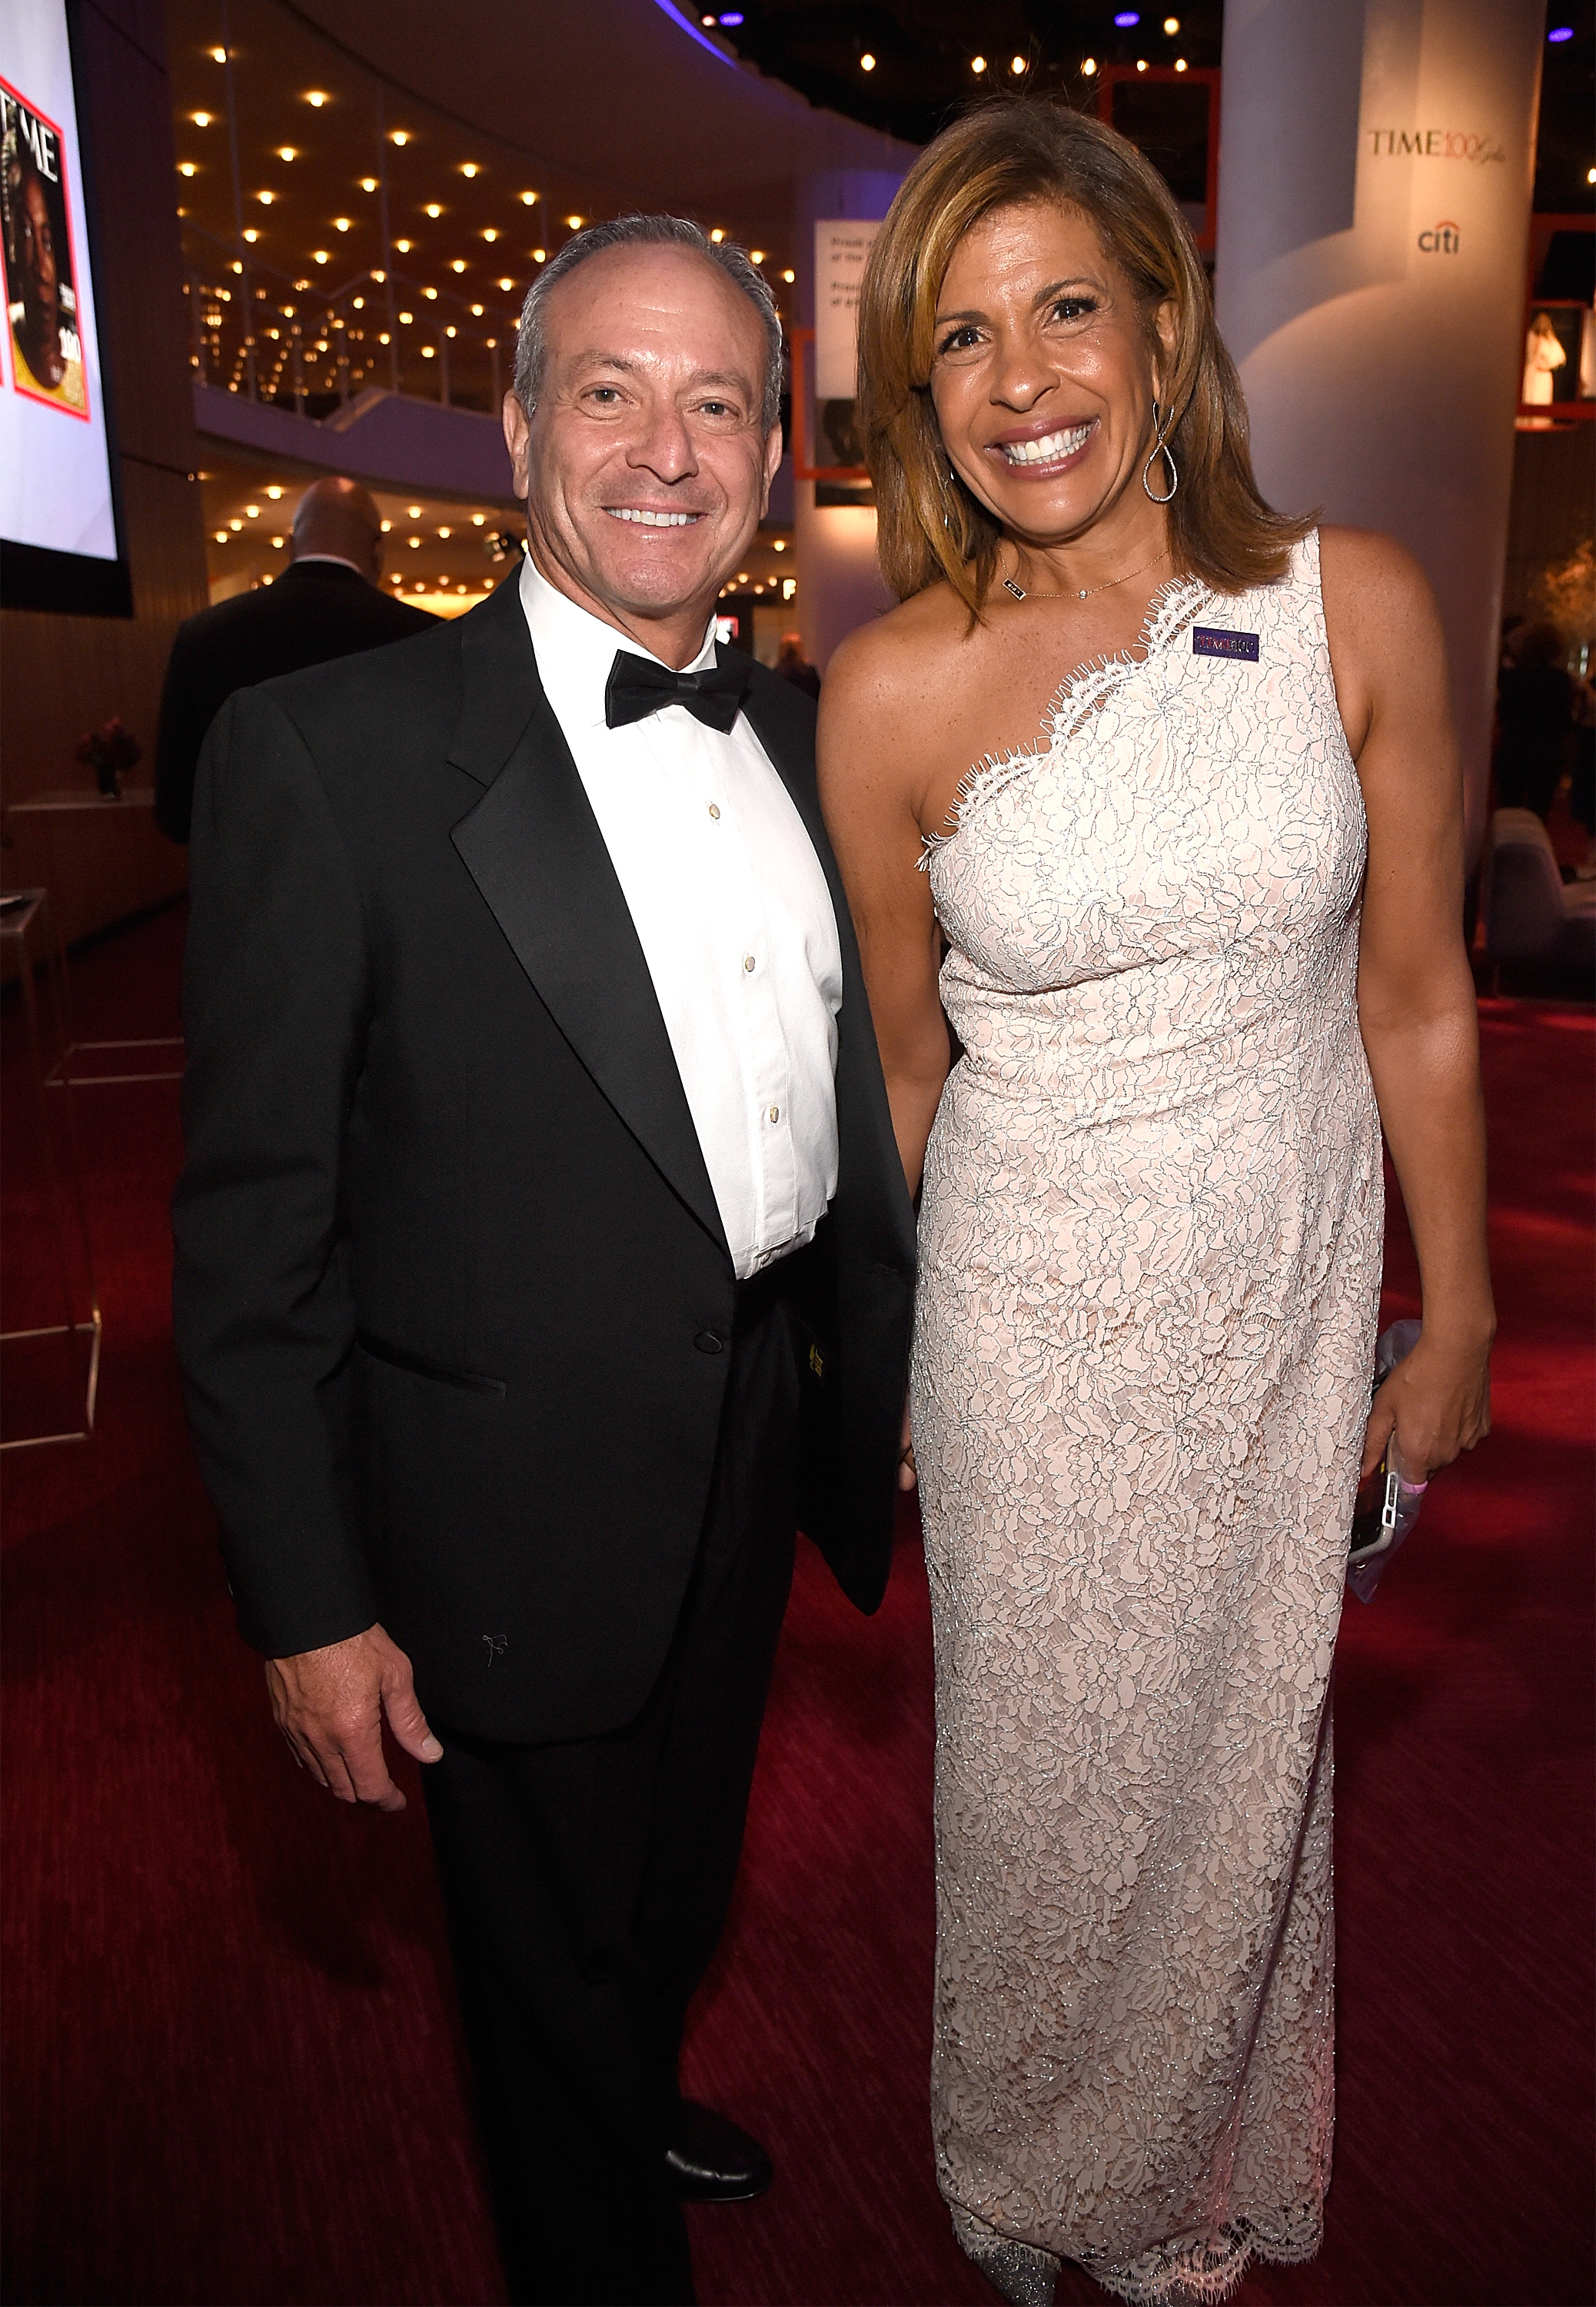 Hoda Kotb and Joel Schiffman at the 2018 Time 100 Gala Dinner in New York | Source: Getty Images